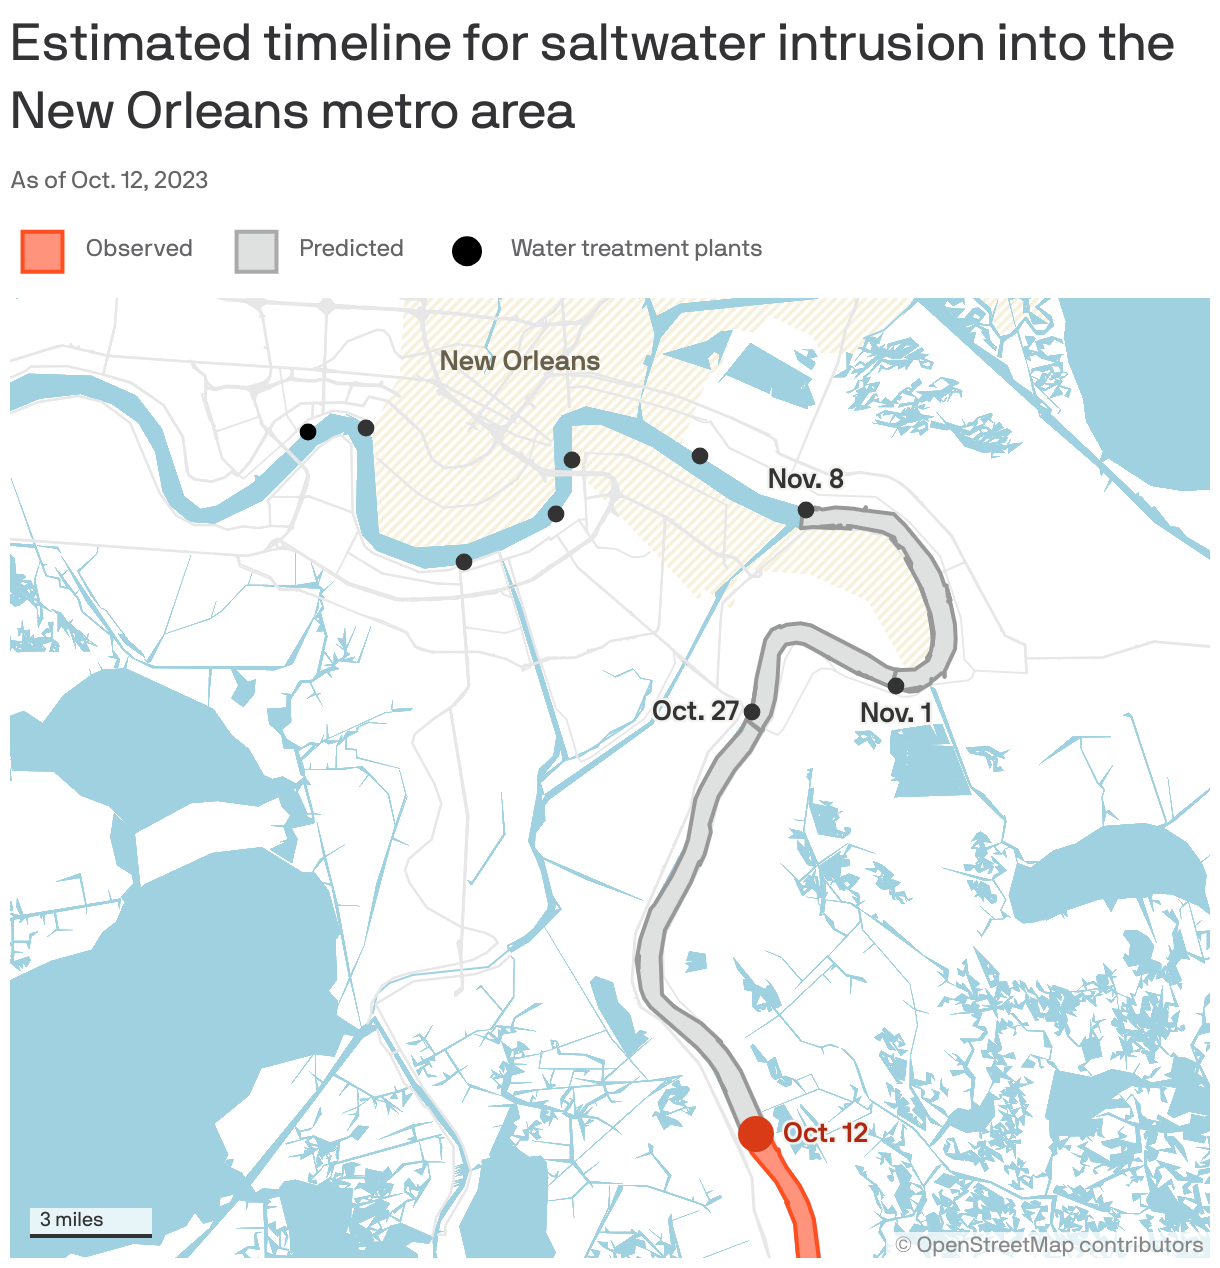 Estimated timeline for saltwater intrusion into the New Orleans metro area